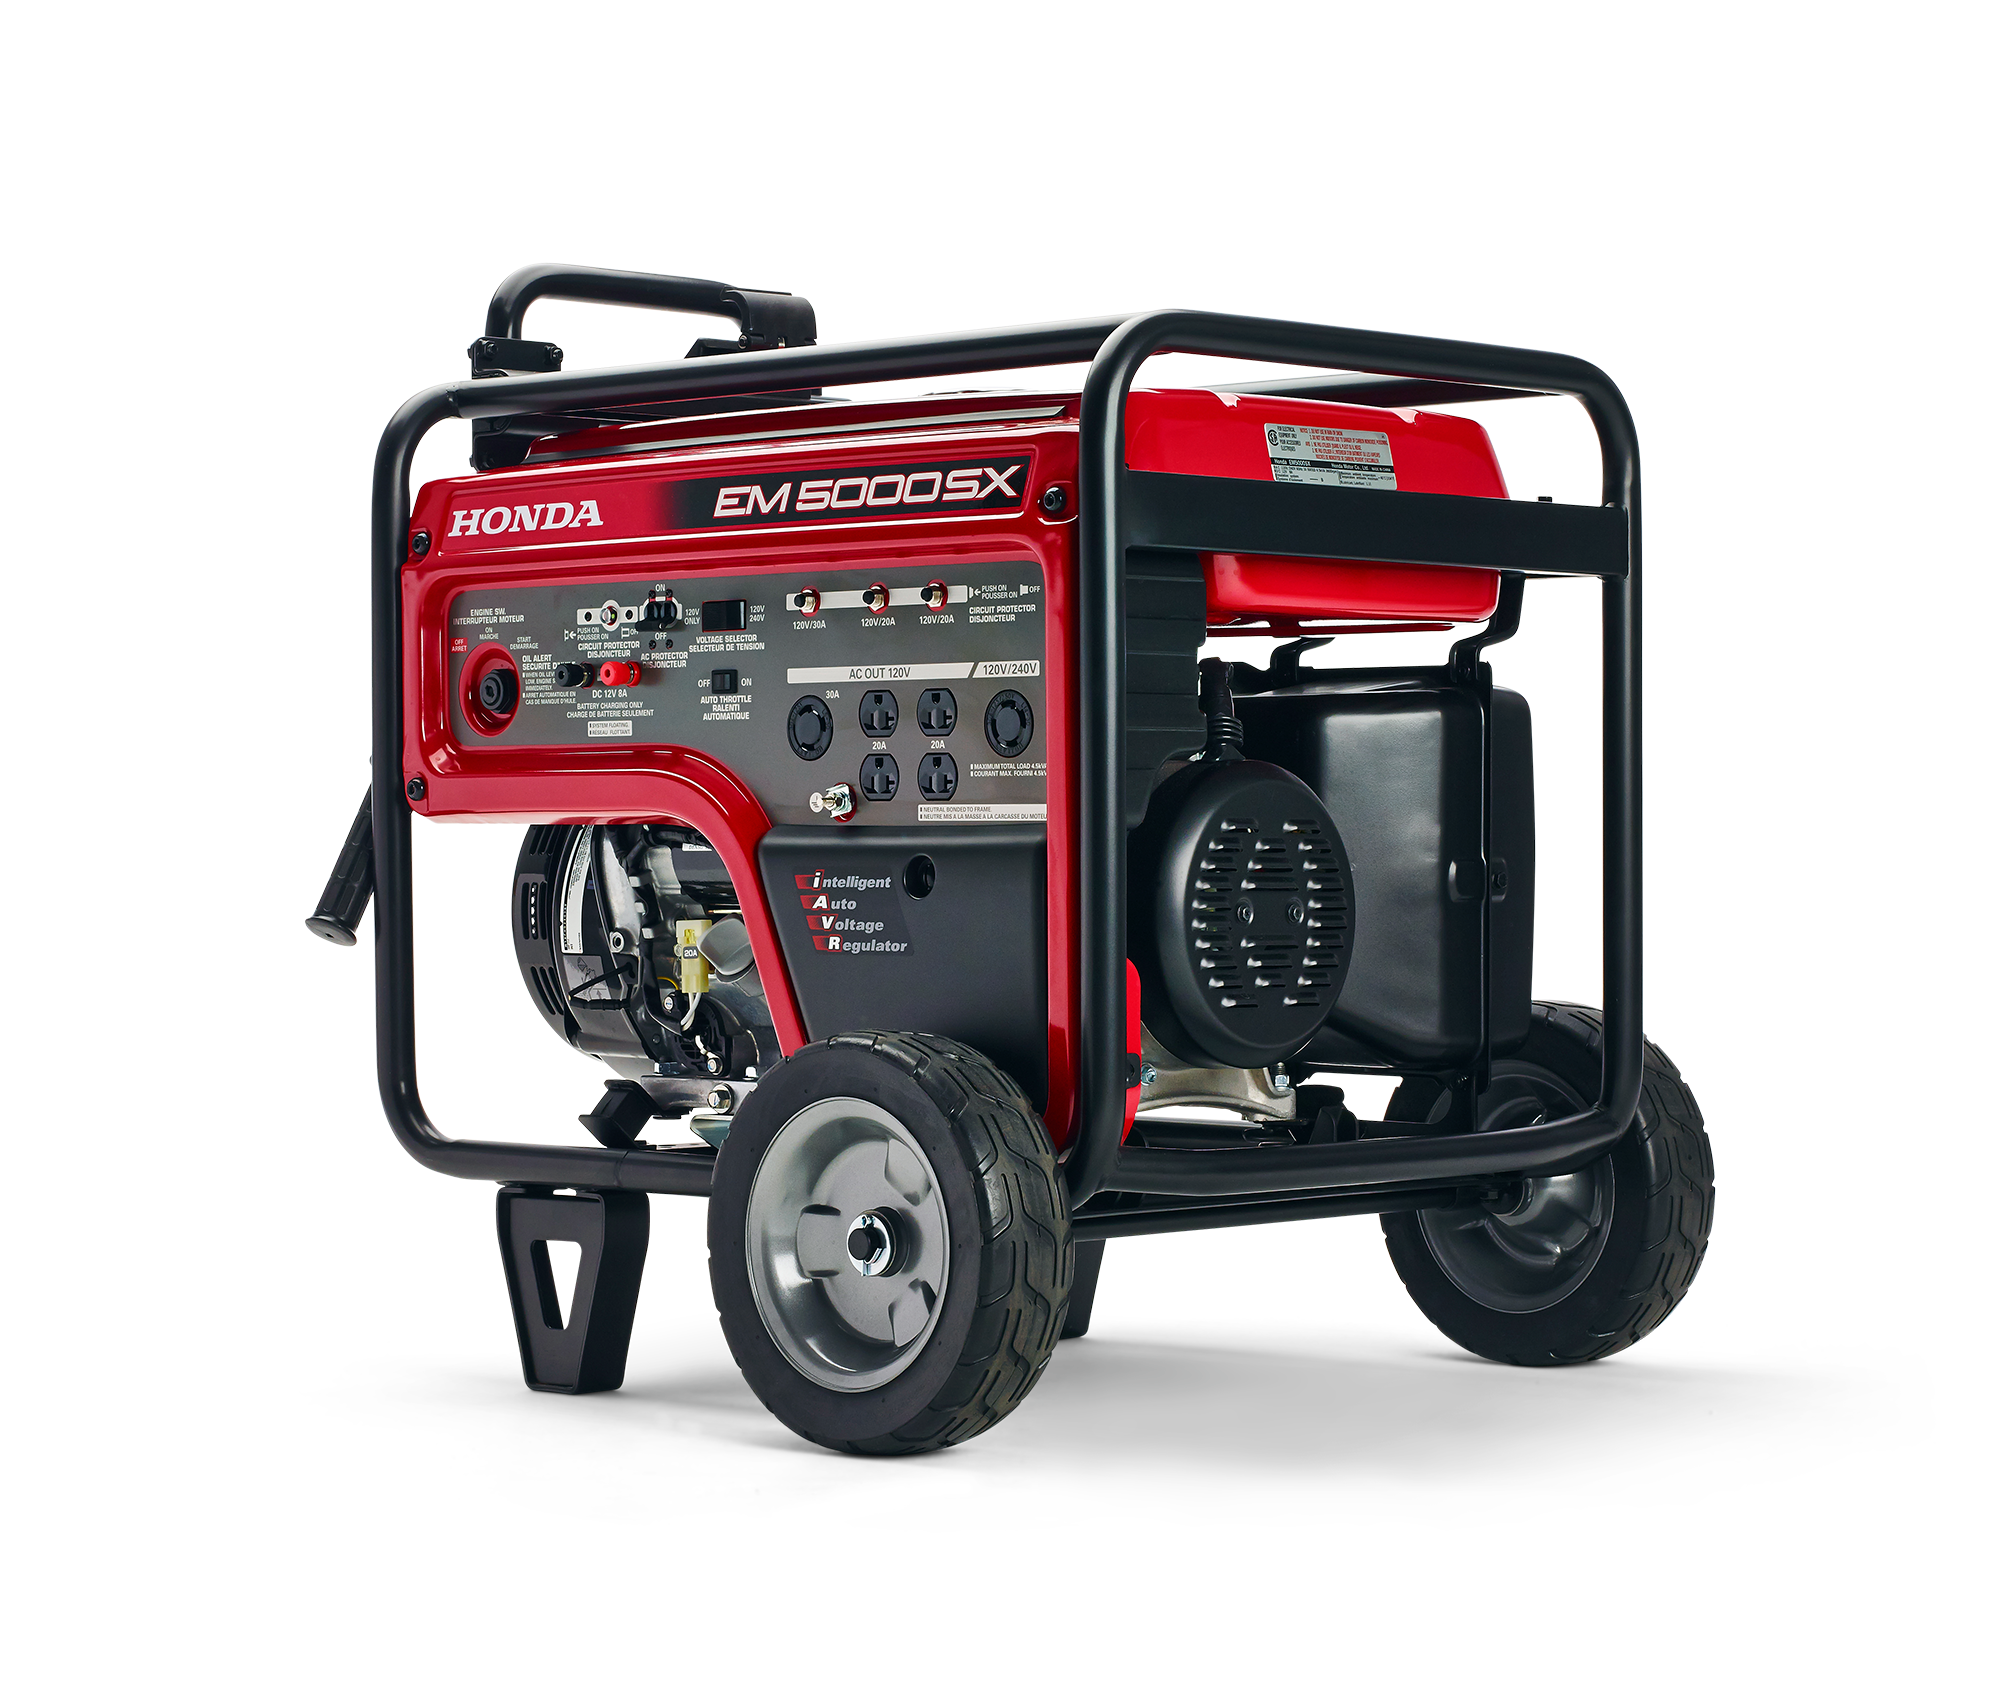 Image of the Electric Start 5000 generator